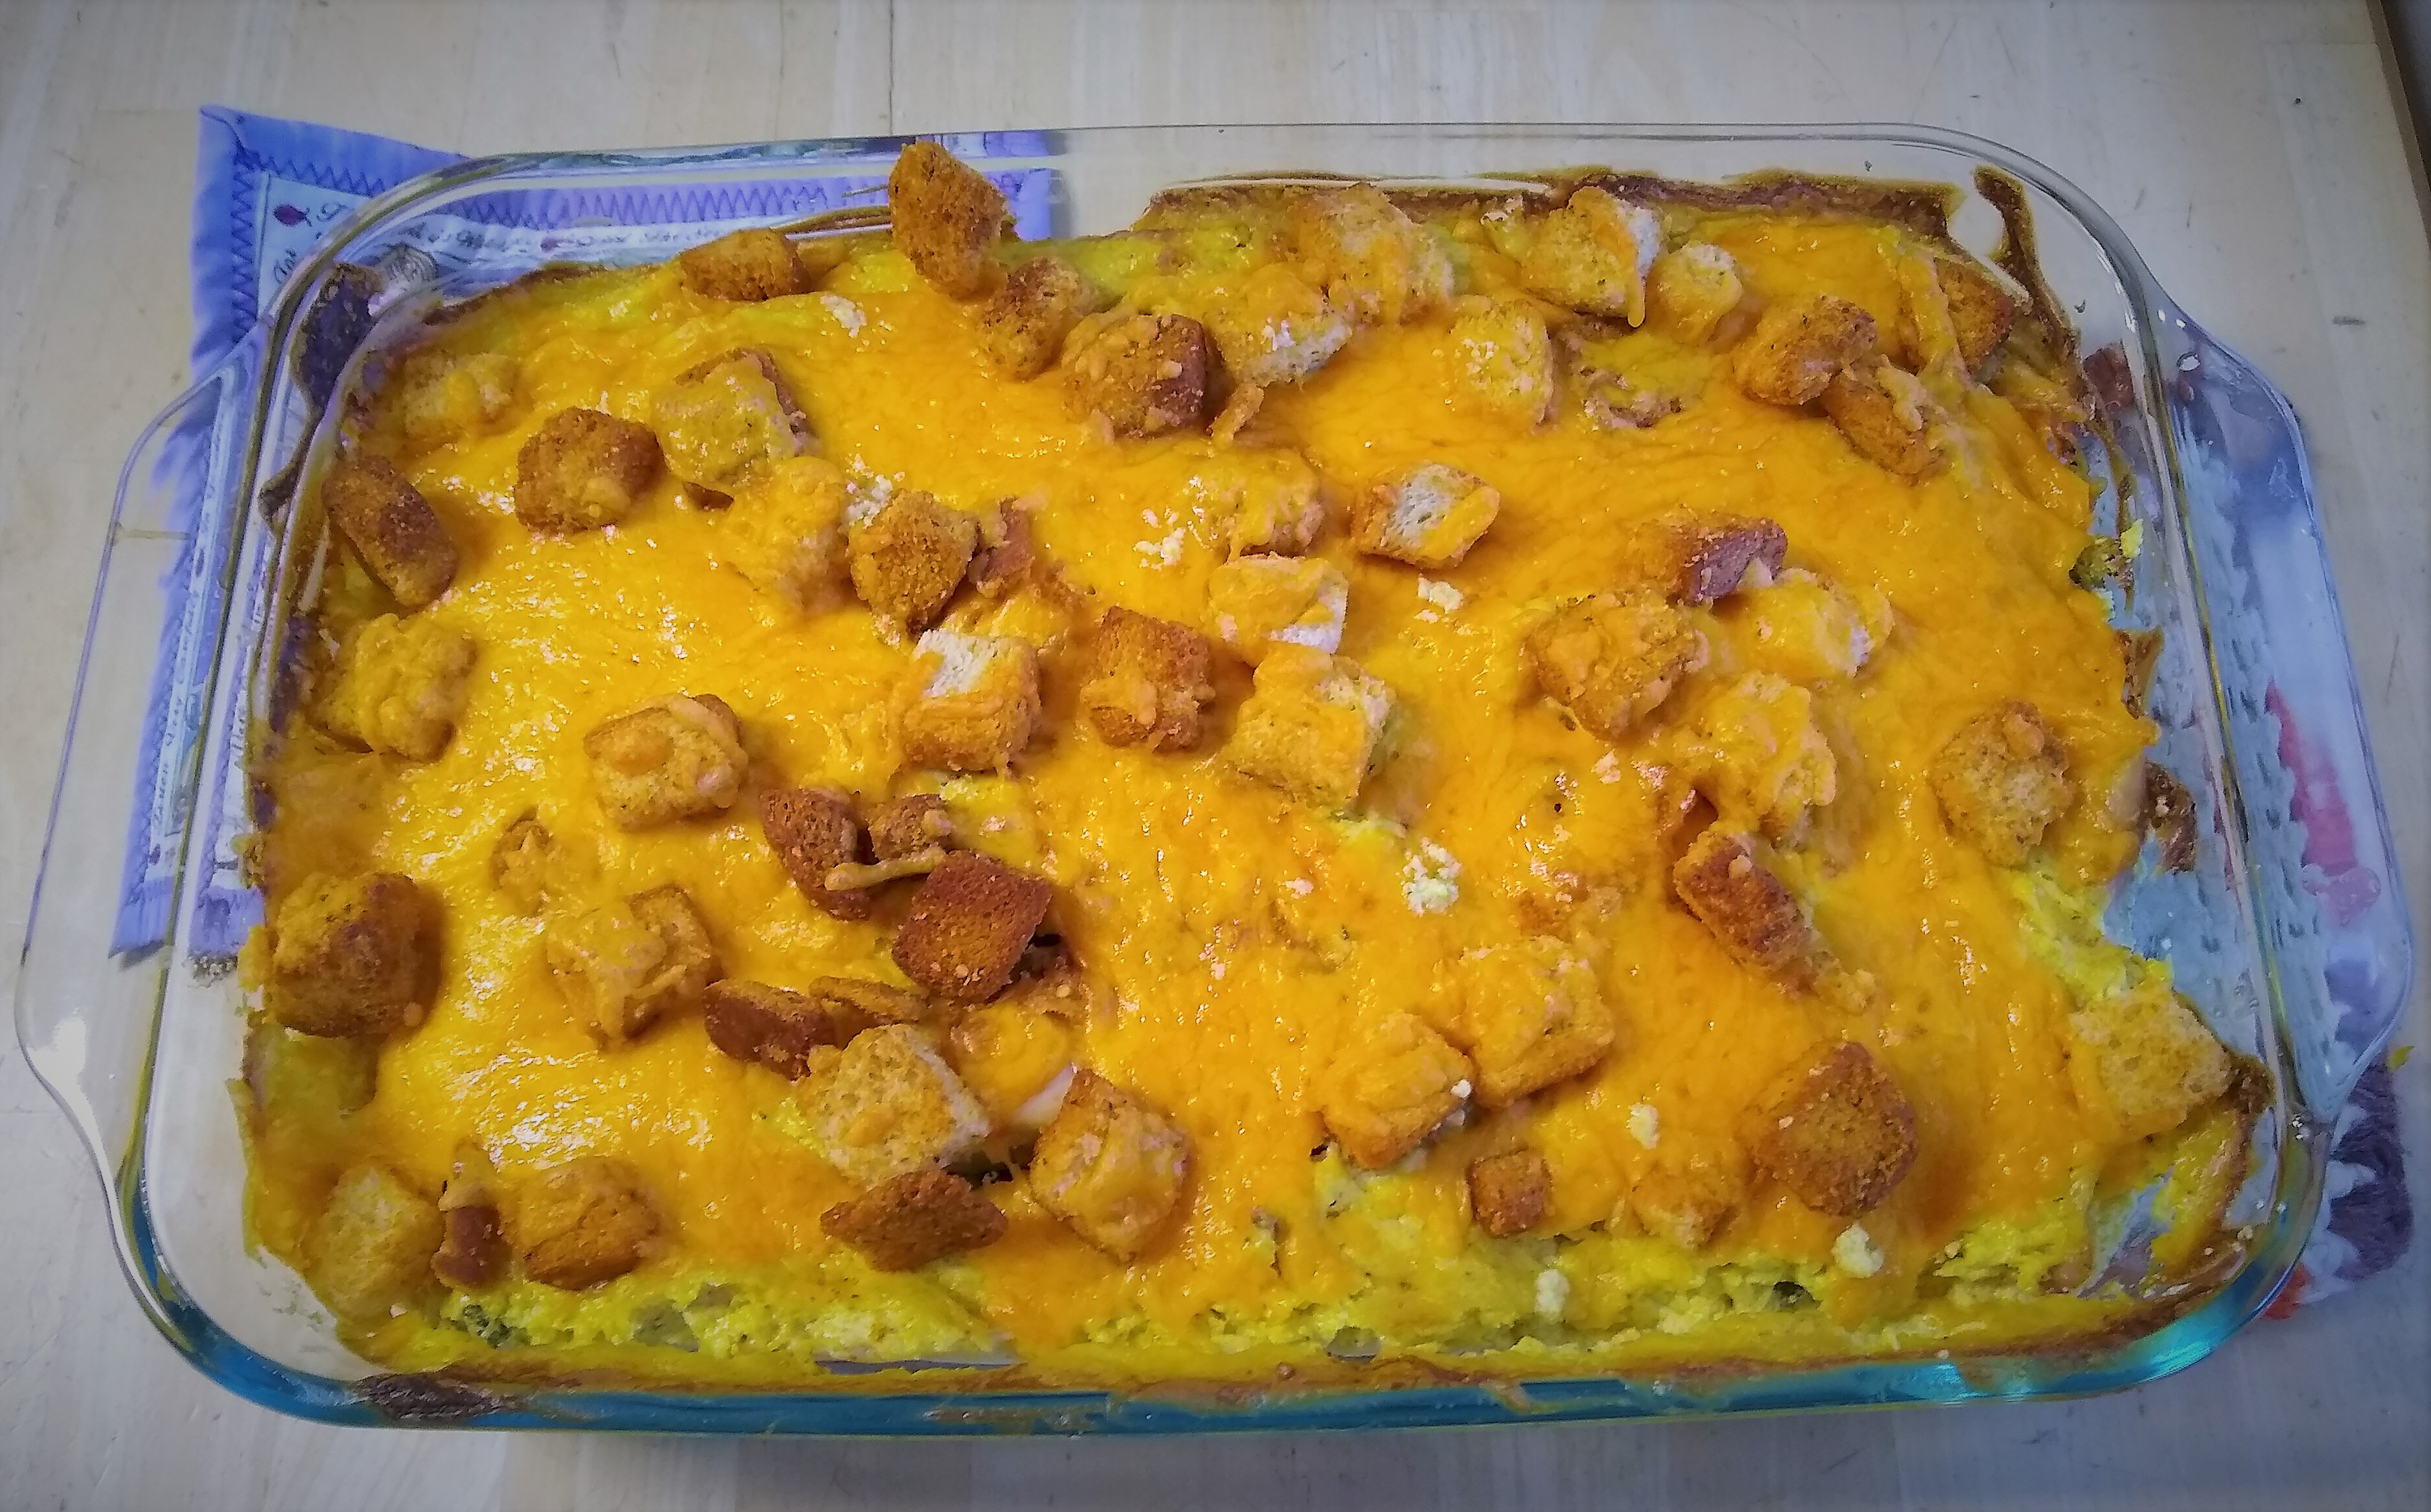 Curried Chicken and Broccoli Casserole Jazz cooking